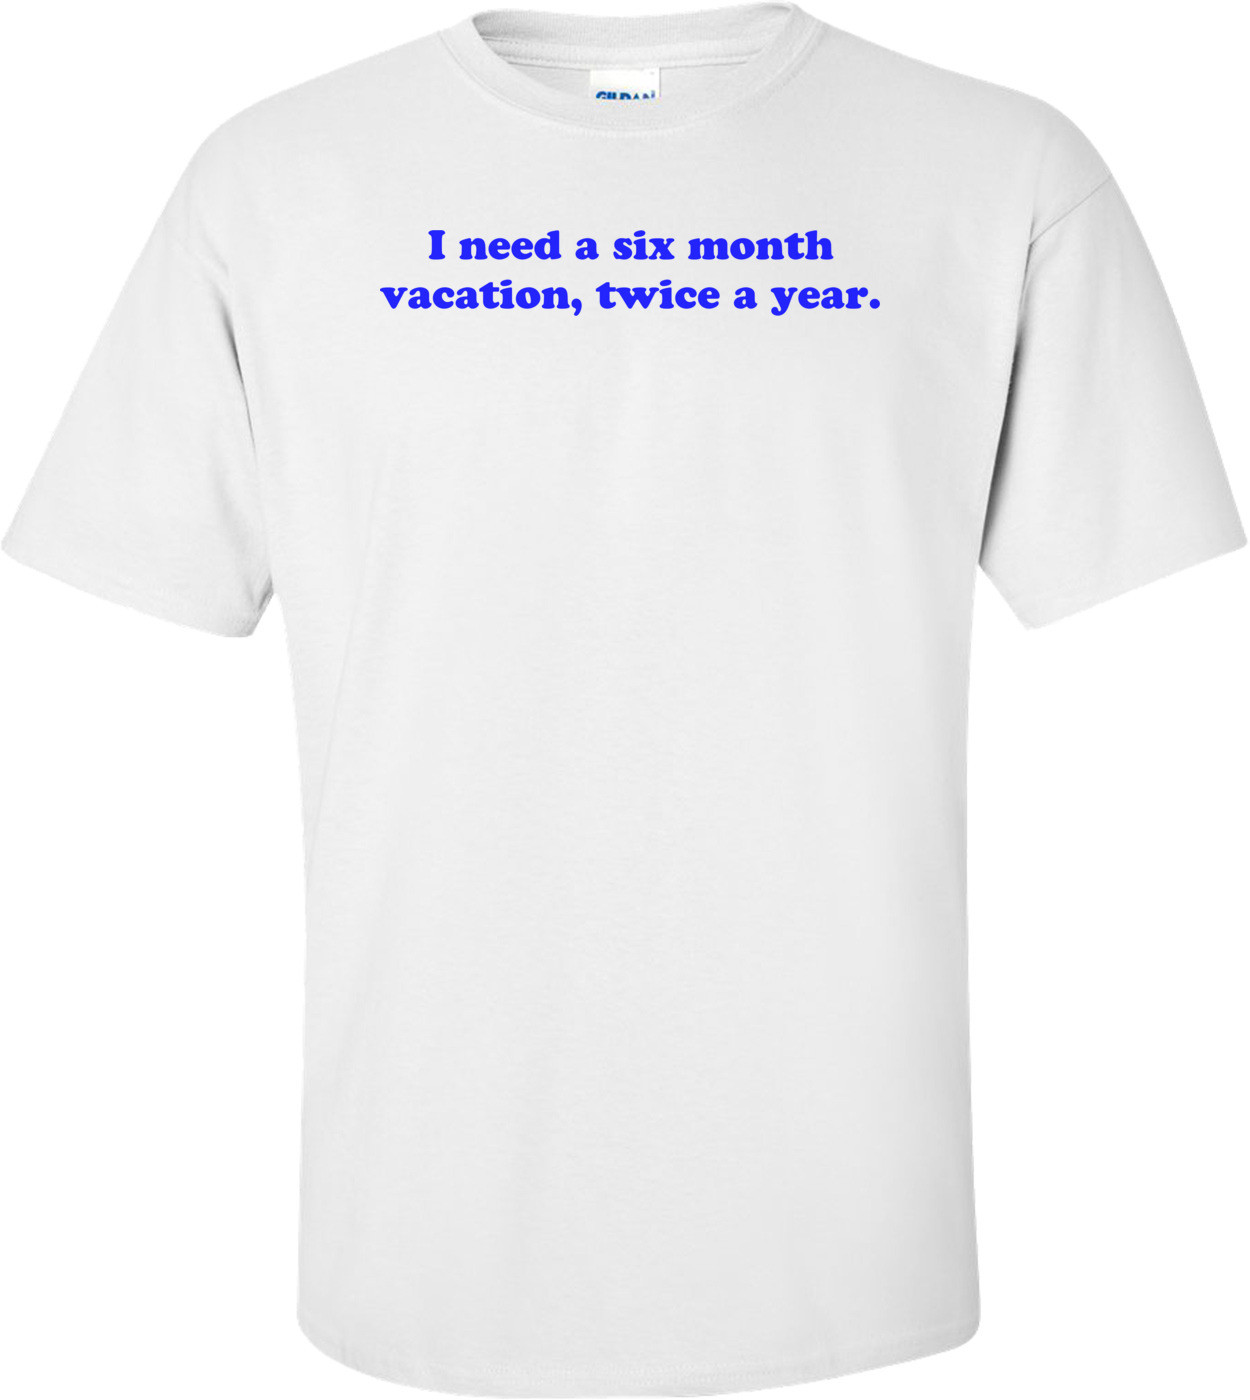 I need a six month vacation, twice a year. Shirt